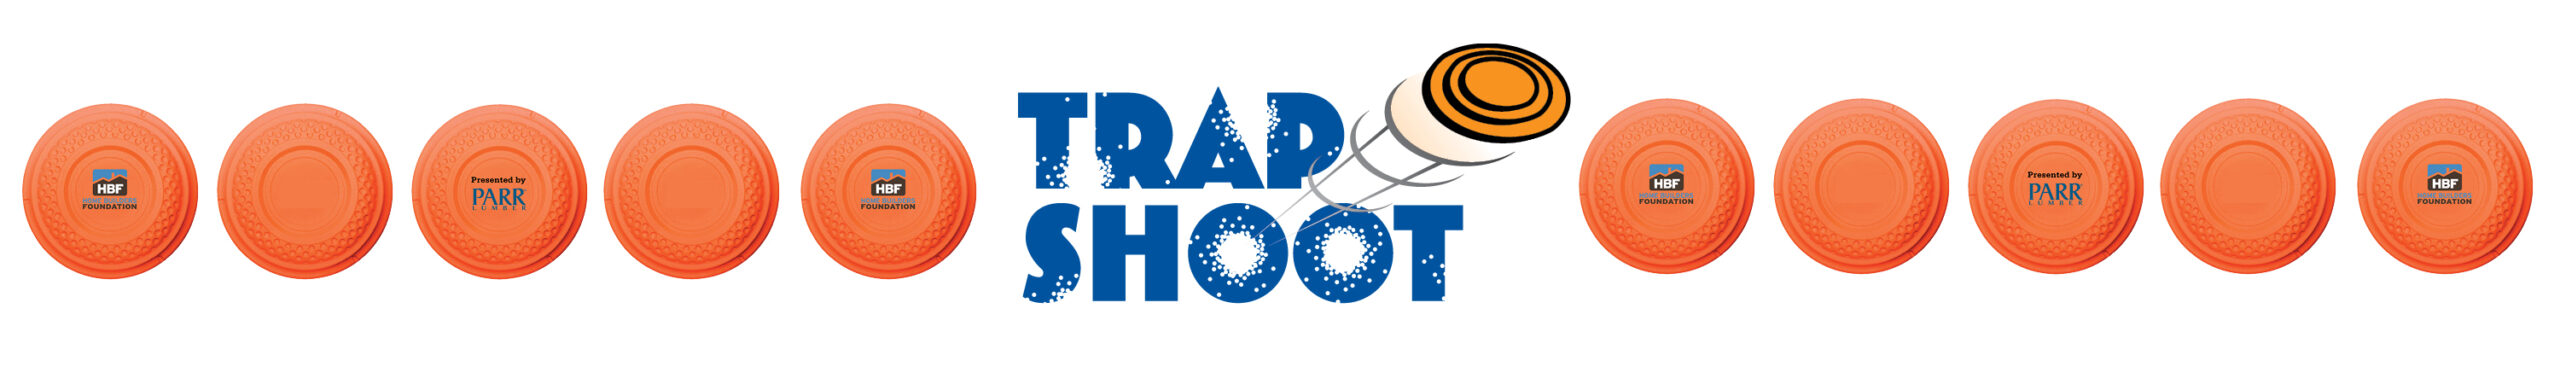 HBF Trap Shoot presented by Parr Lumber